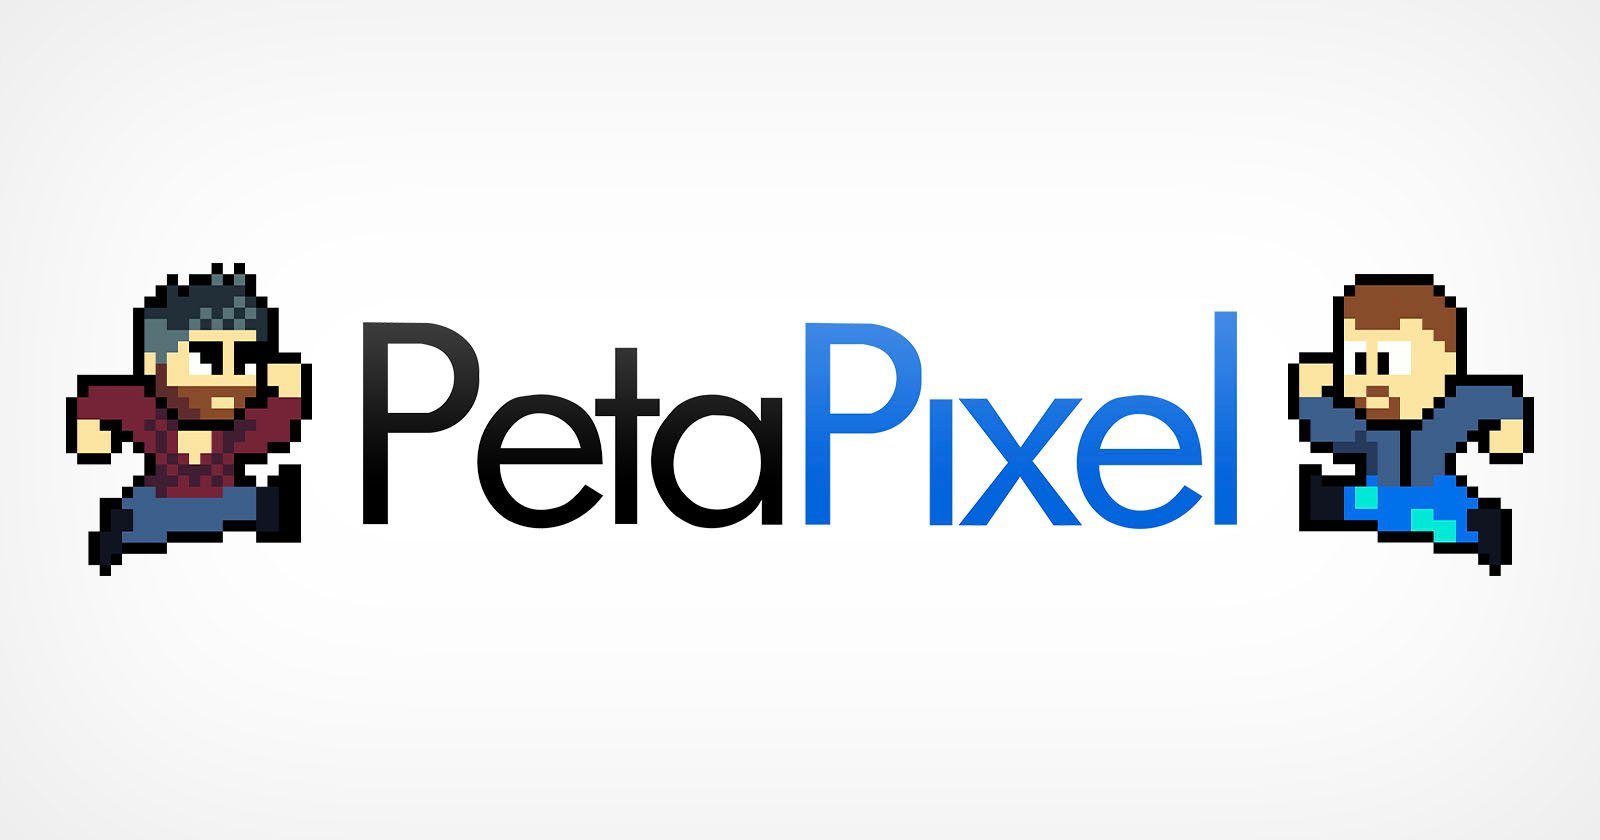 Logo of petapixel featuring pixelated characters, one in blue clothing on the right, and another in gray on the left, against a simple white background.